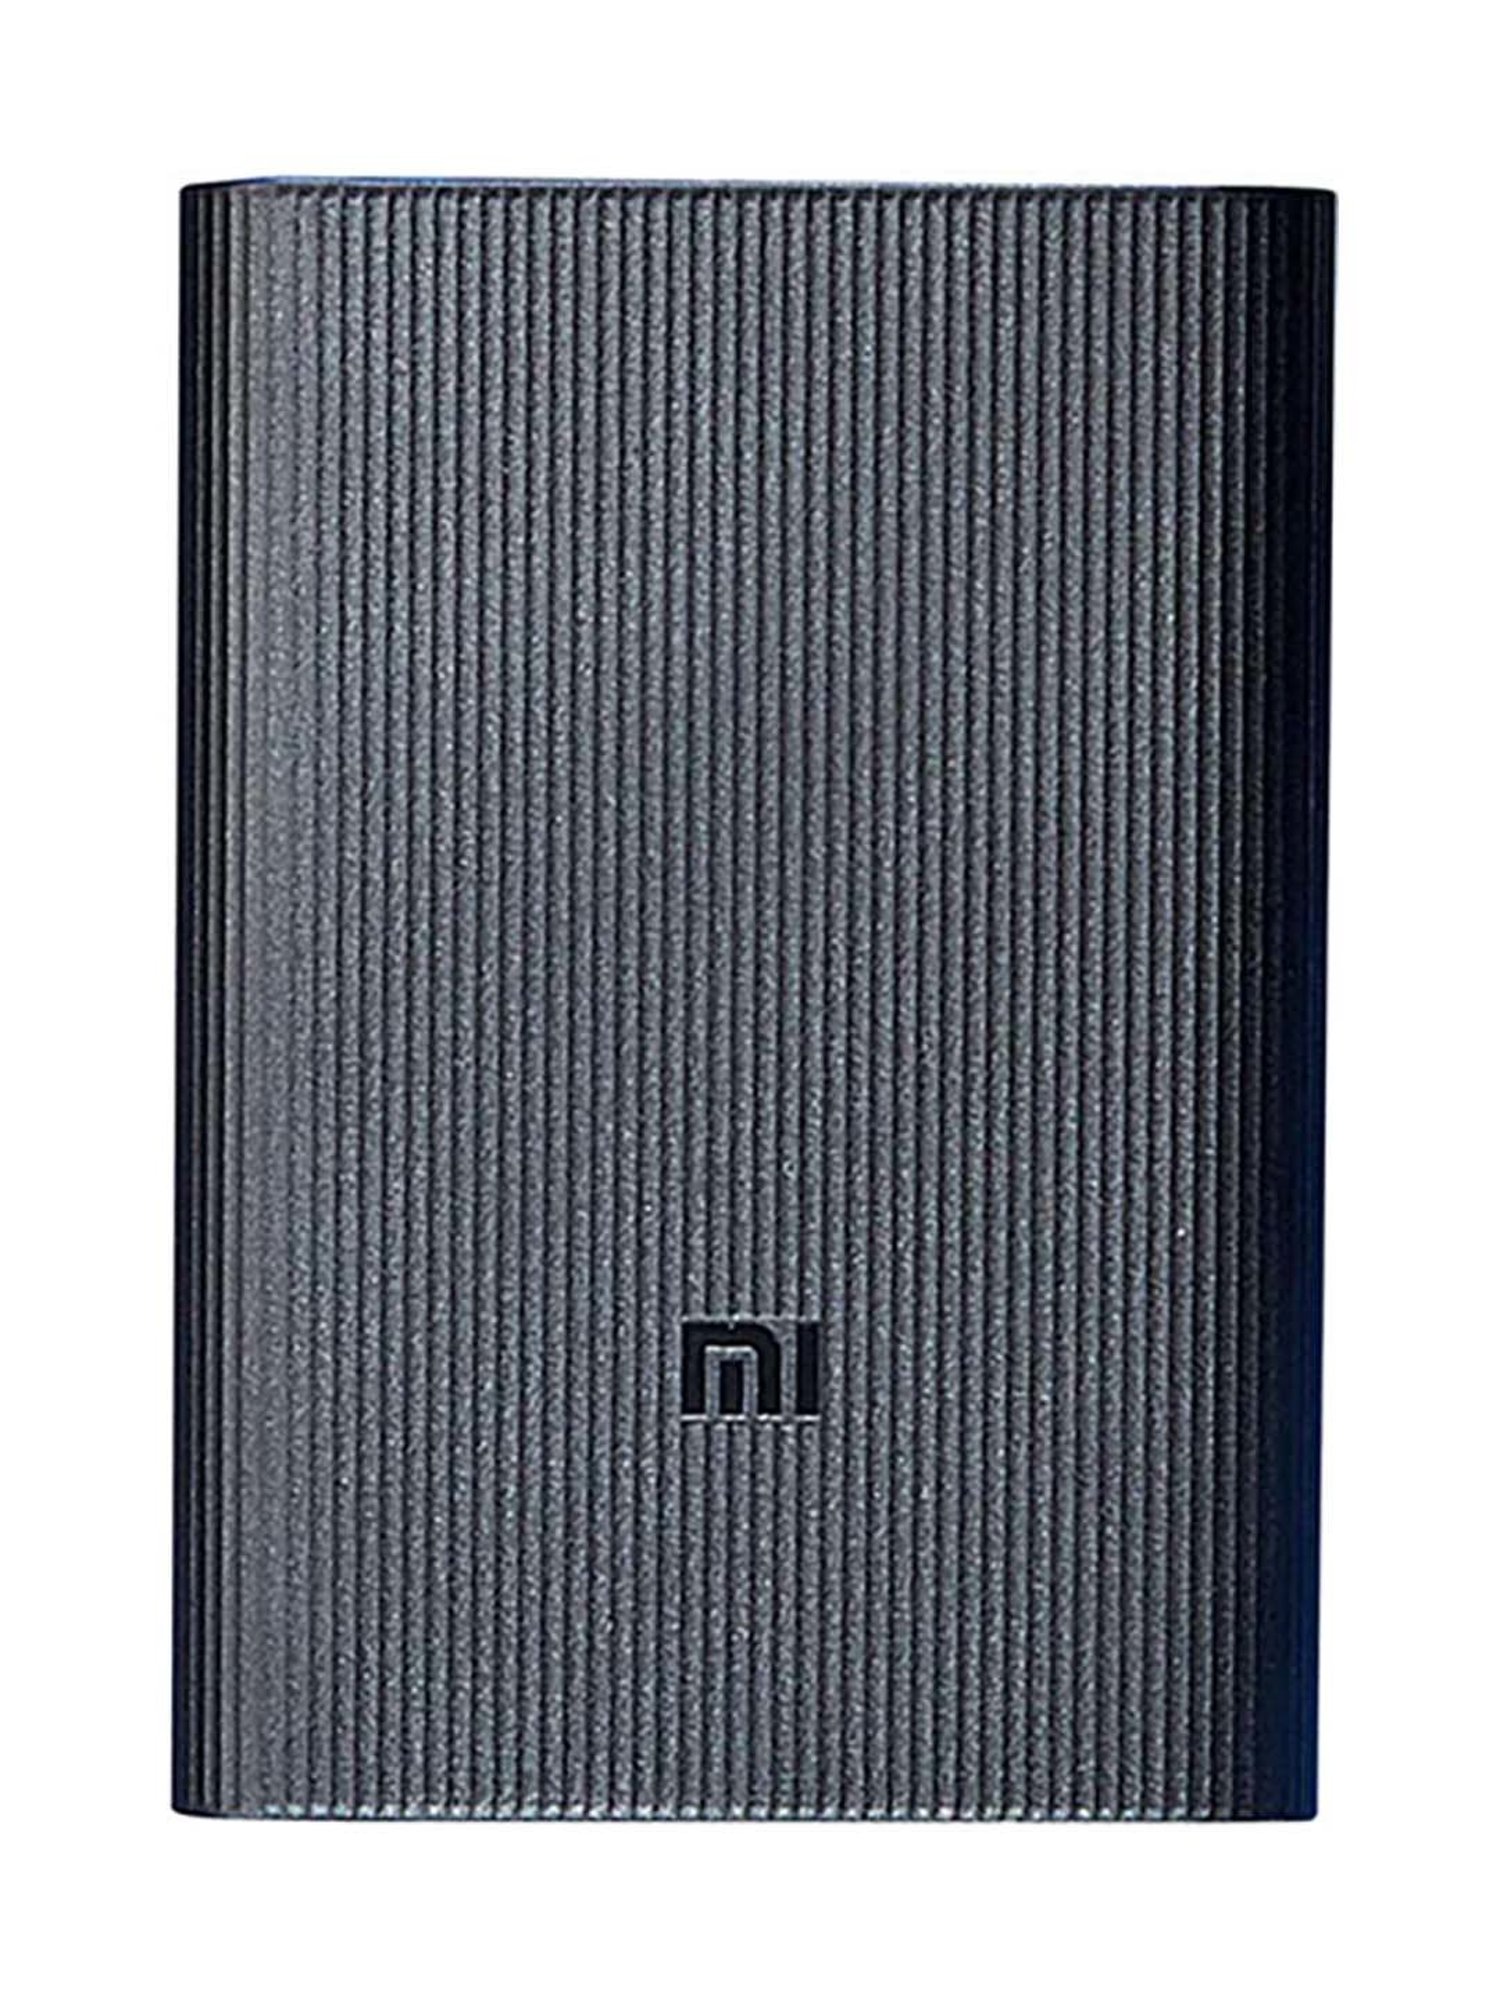 Xiaomi launches 10000mAh Mi Pocket Power Bank Pro at Rs 1,099 - Times of  India